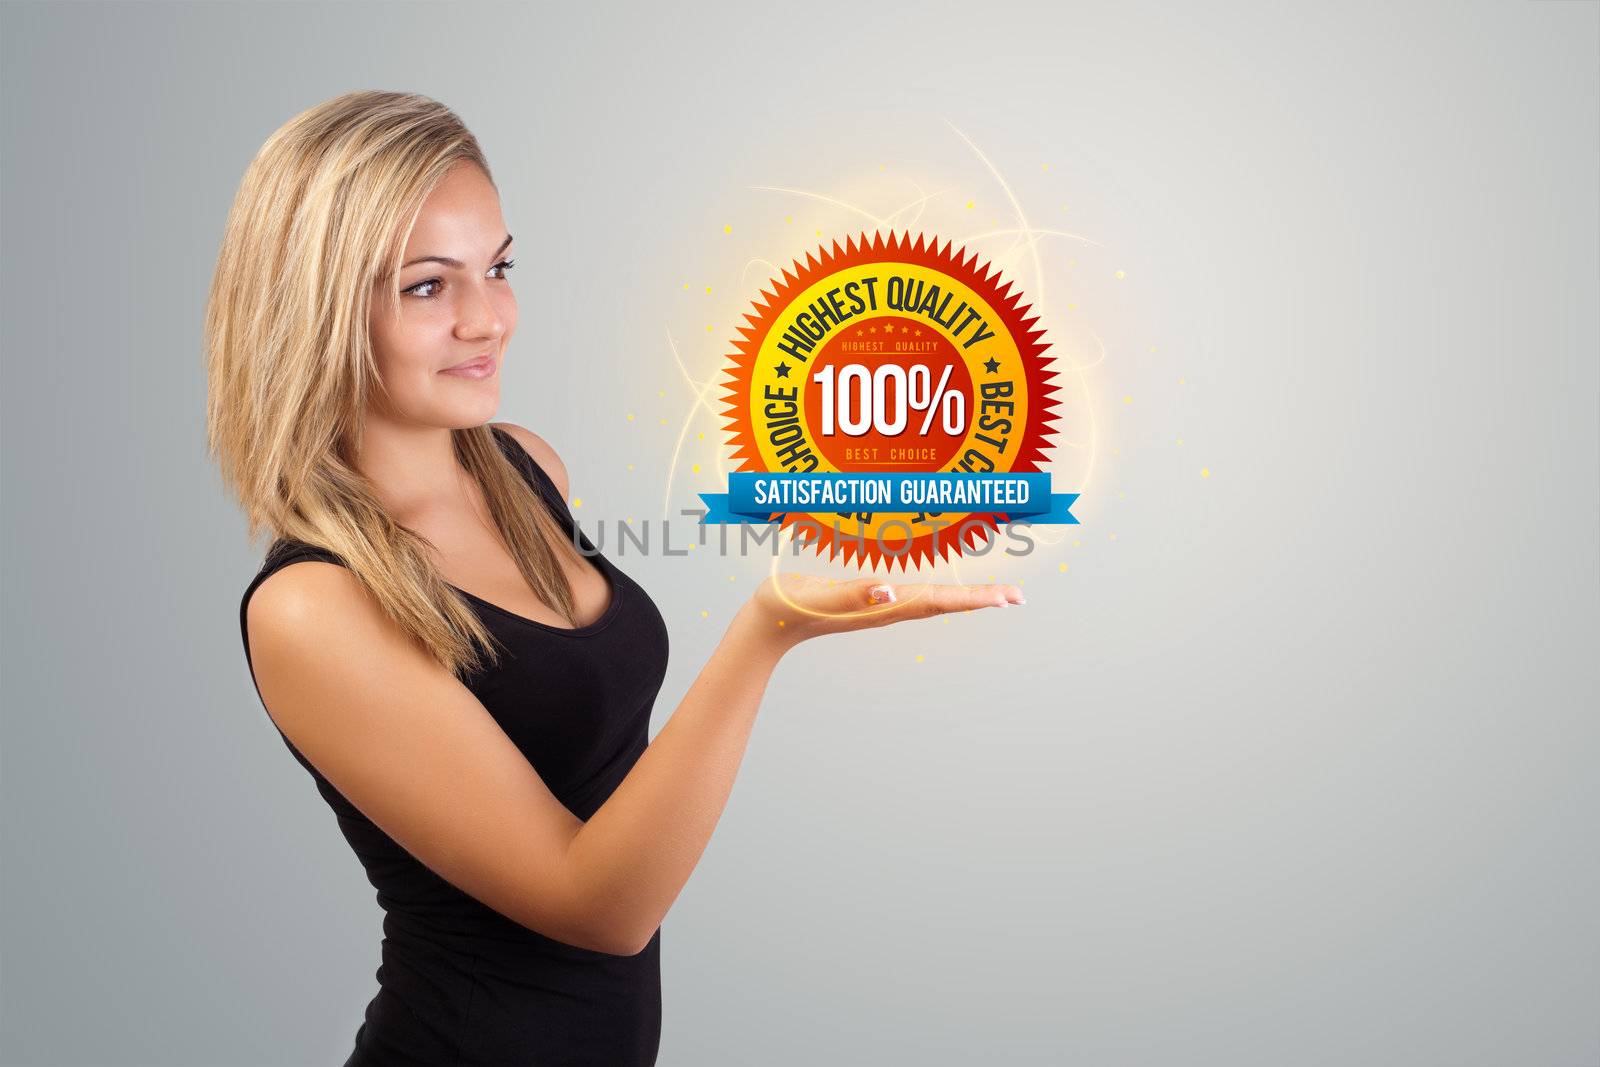 Young woman holding virtual business sign